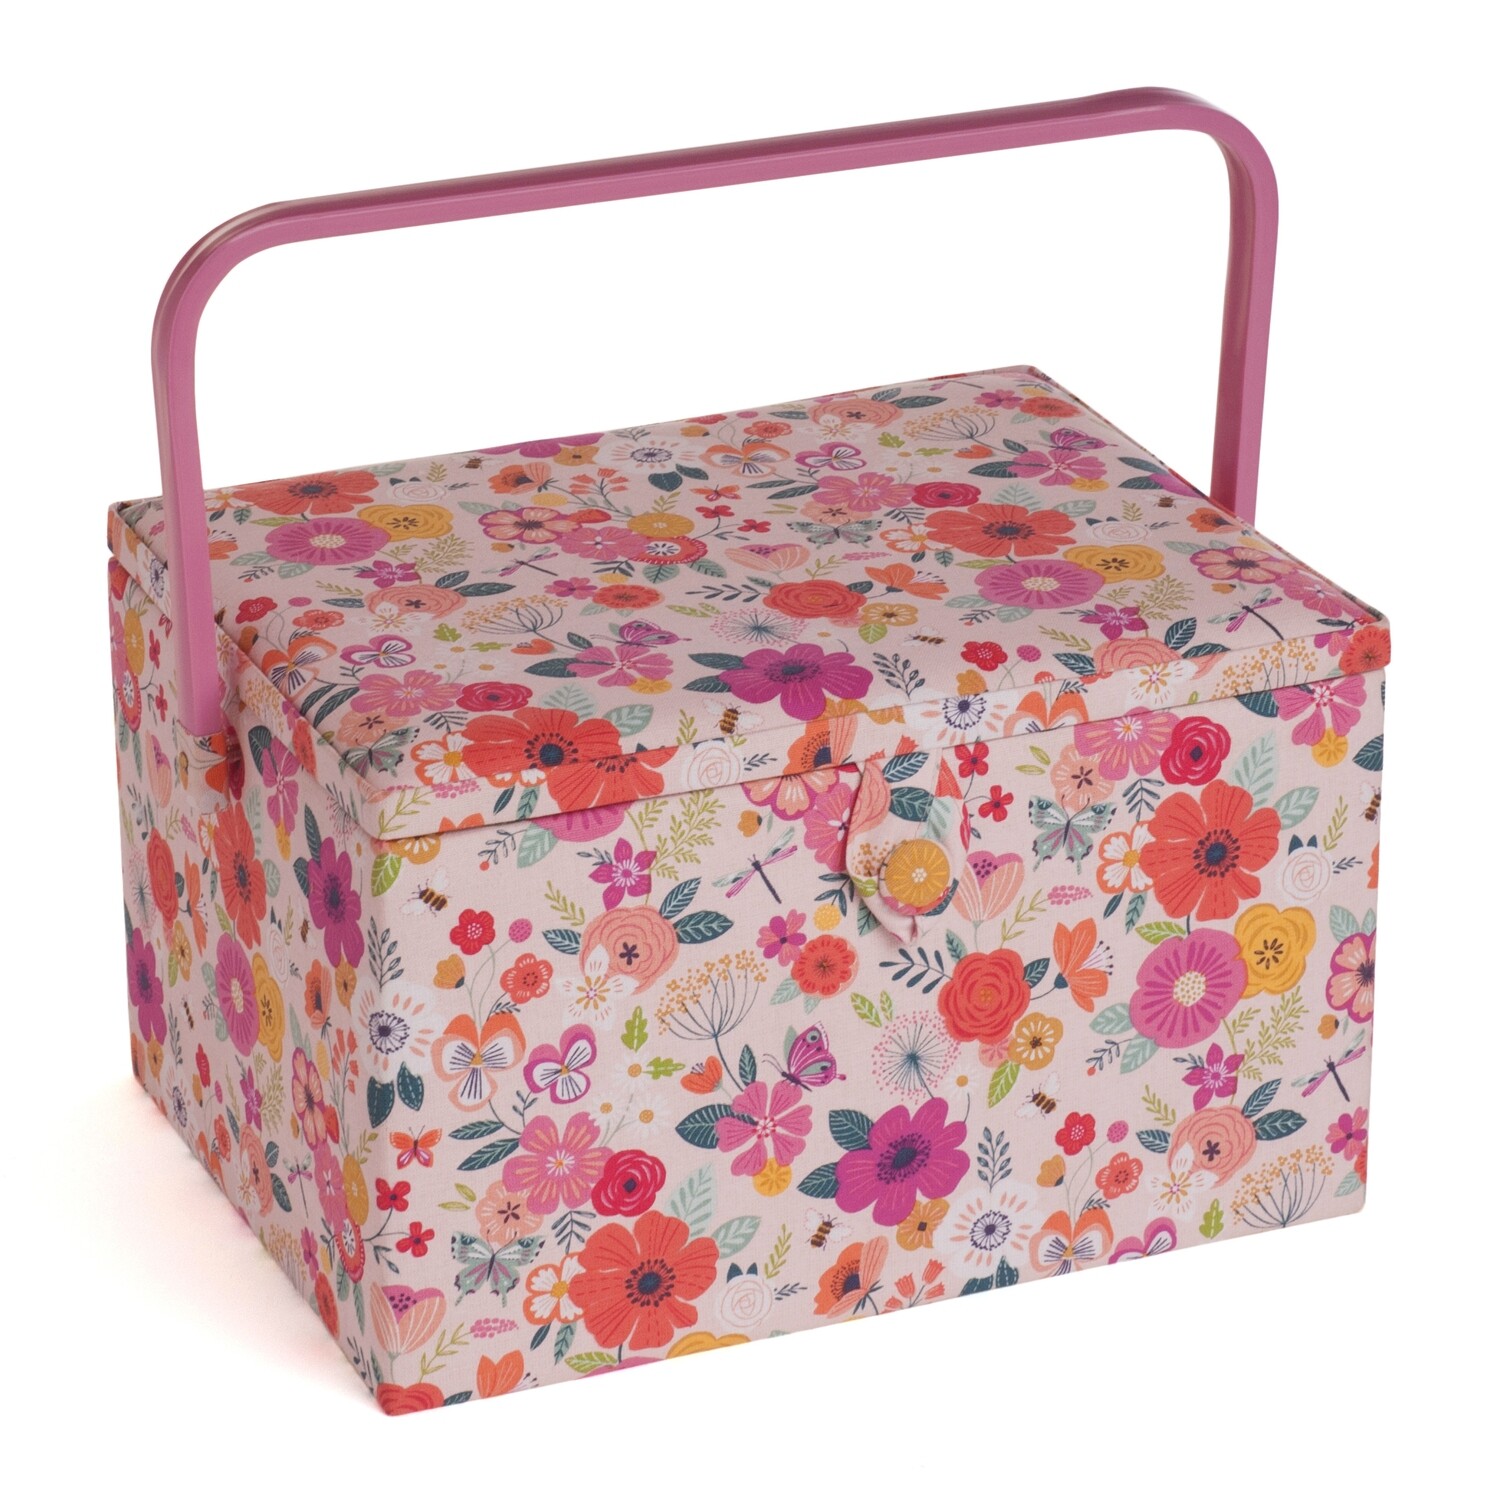 Sewing Box Large - Floral Garden Pink